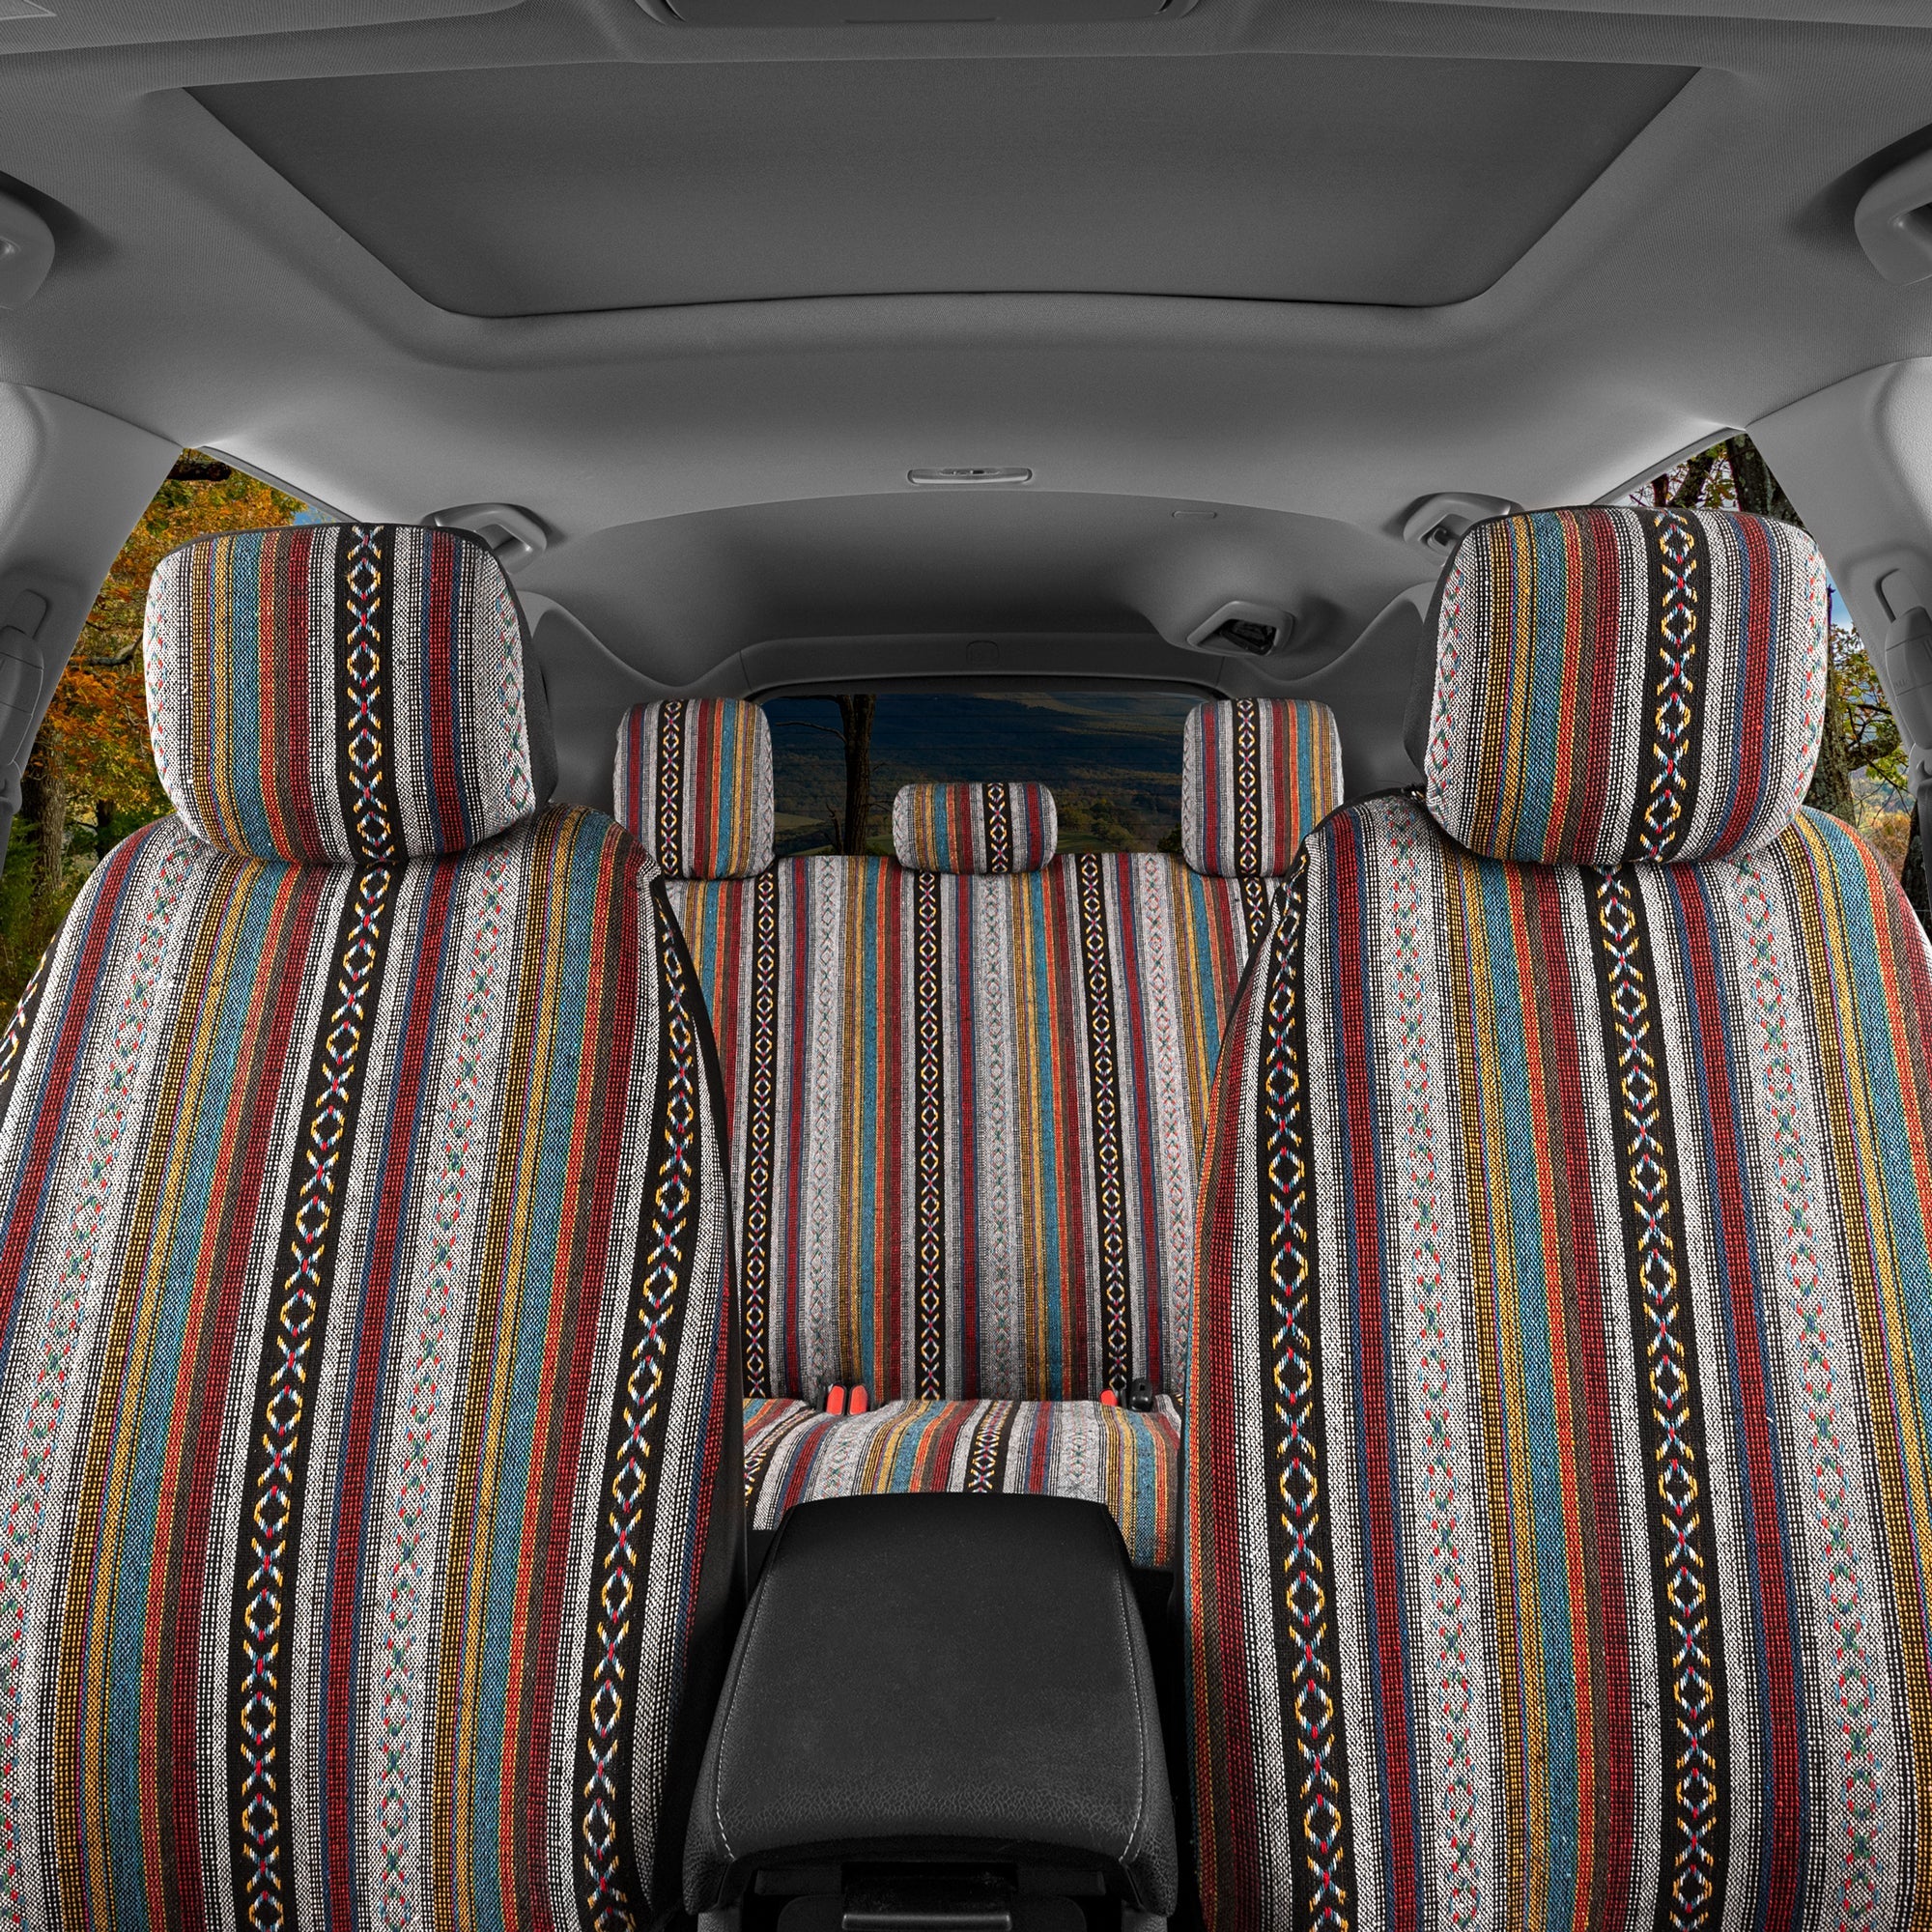 BDK Saddle Blanket Seat Covers for Cars Full Set - Striped Woven Mexican Blanket Seat Covers with Matching Headrest Covers, Multi-Color Baja Seat Covers for Truck Auto Van SUV